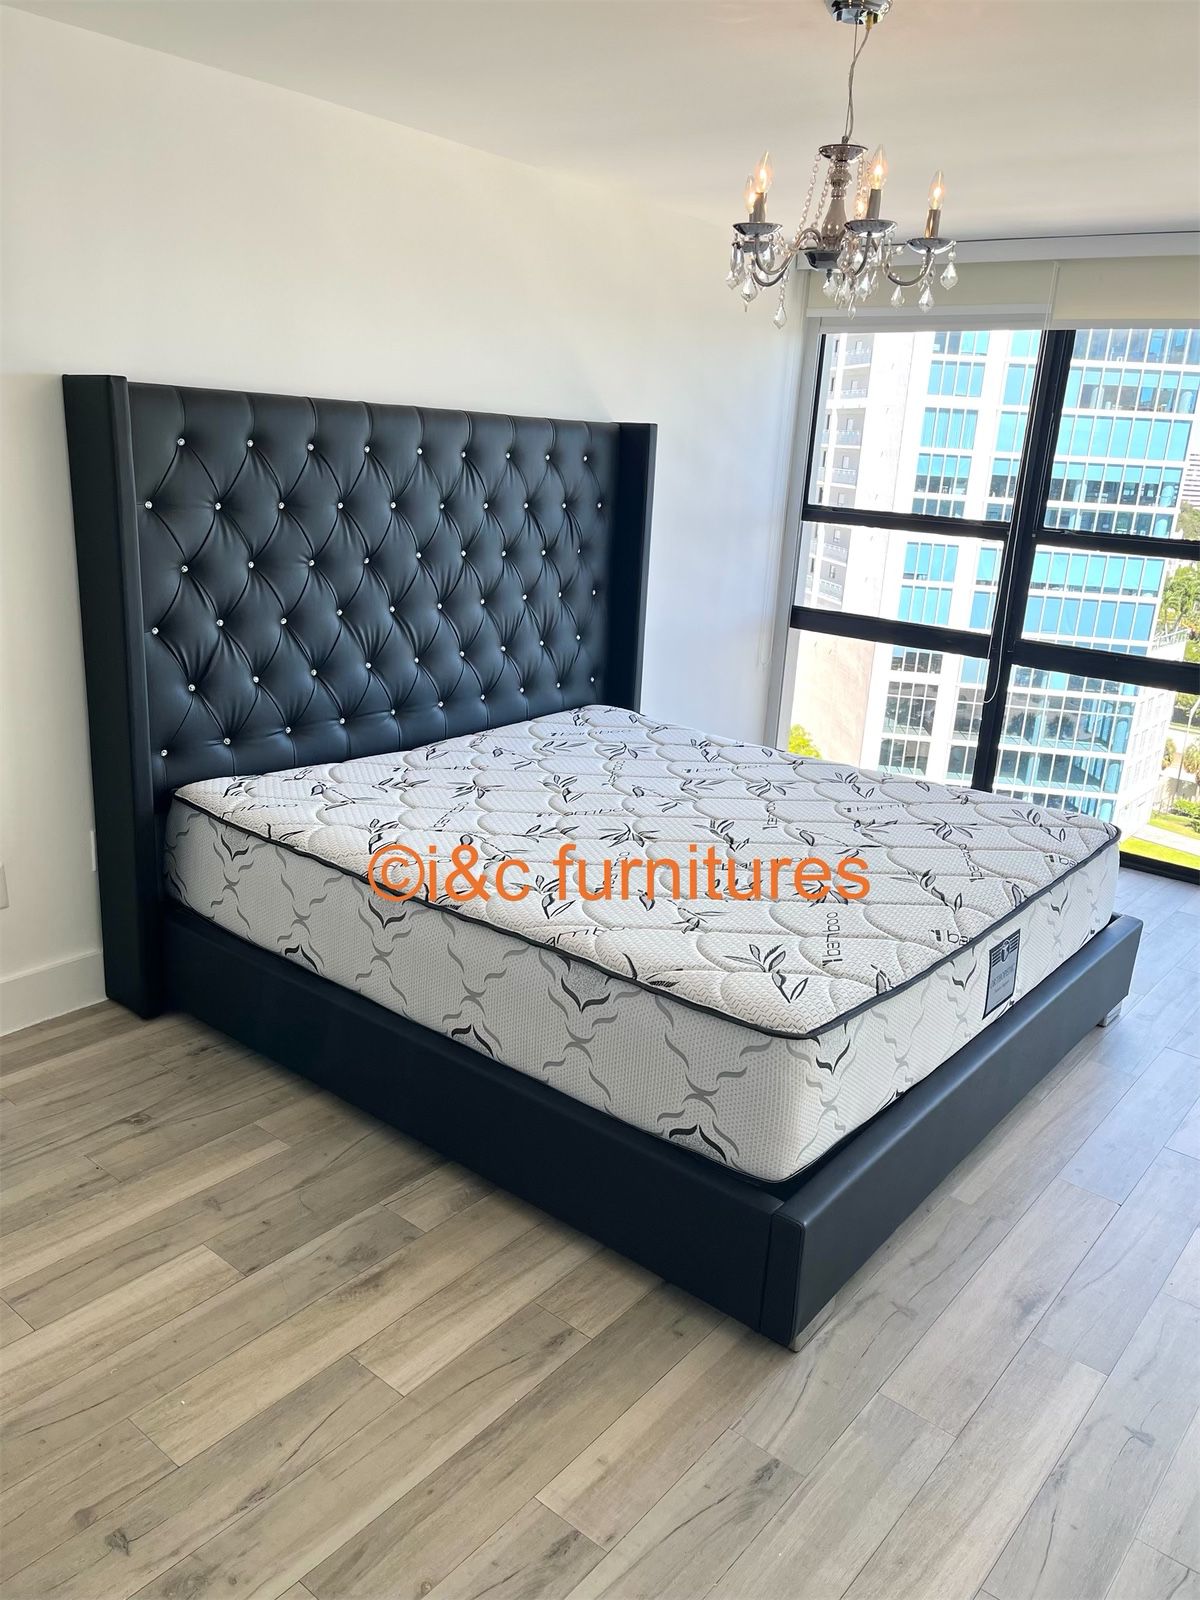 Bed Frame New In The Box With Mattress Same Day Delivery. Queen Size Full Size King Size